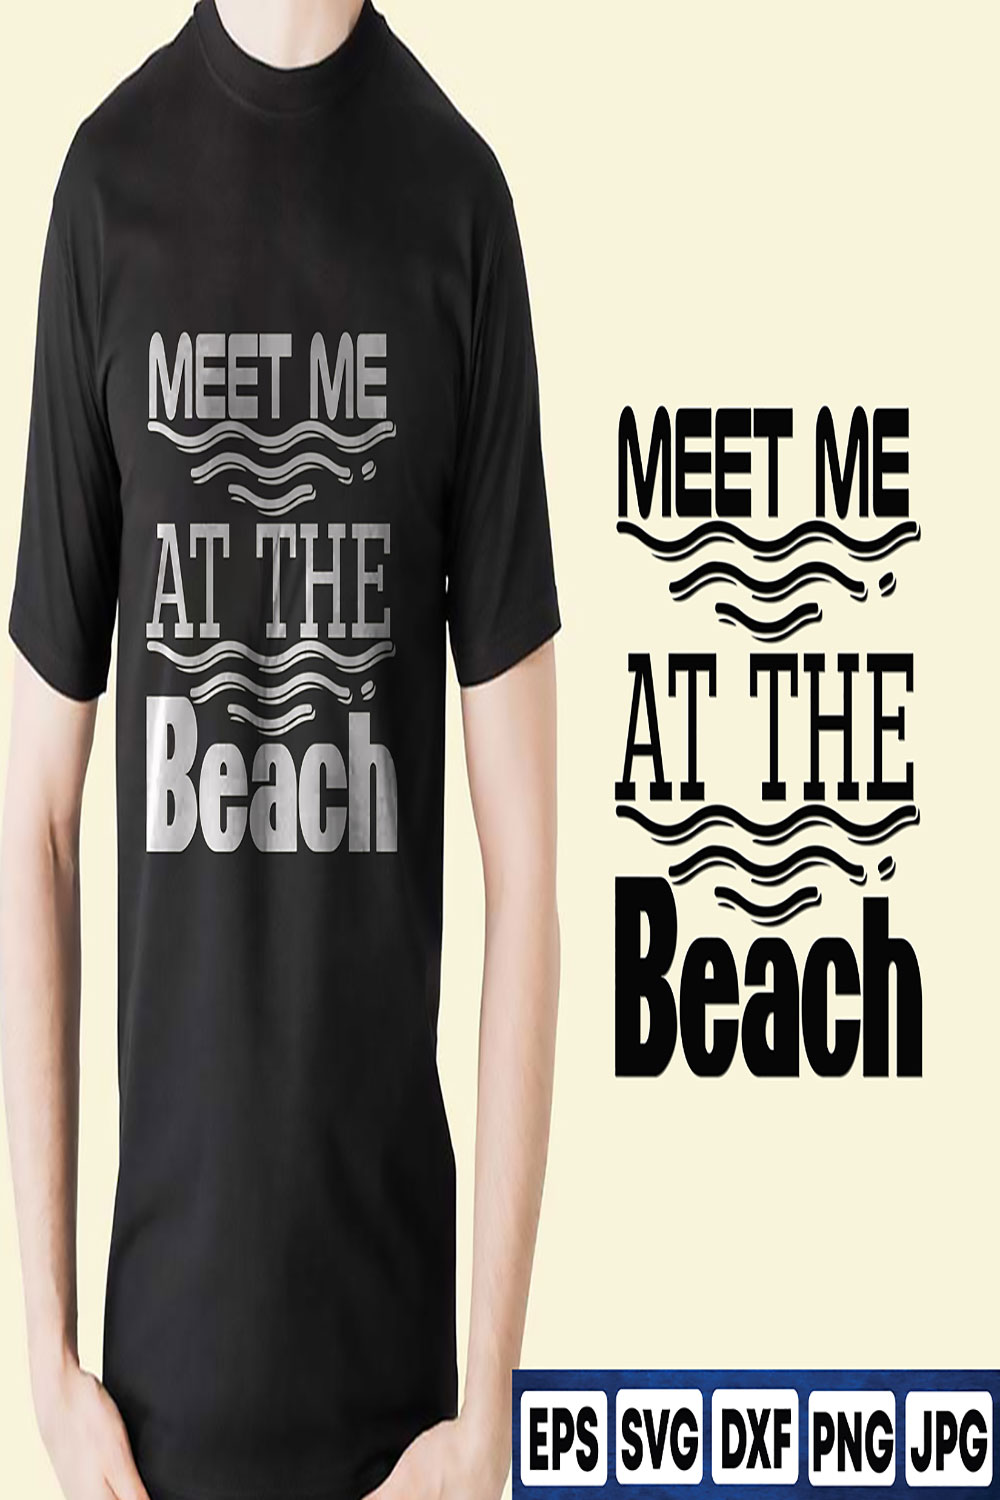 Meet-me-at-the-beach pinterest preview image.